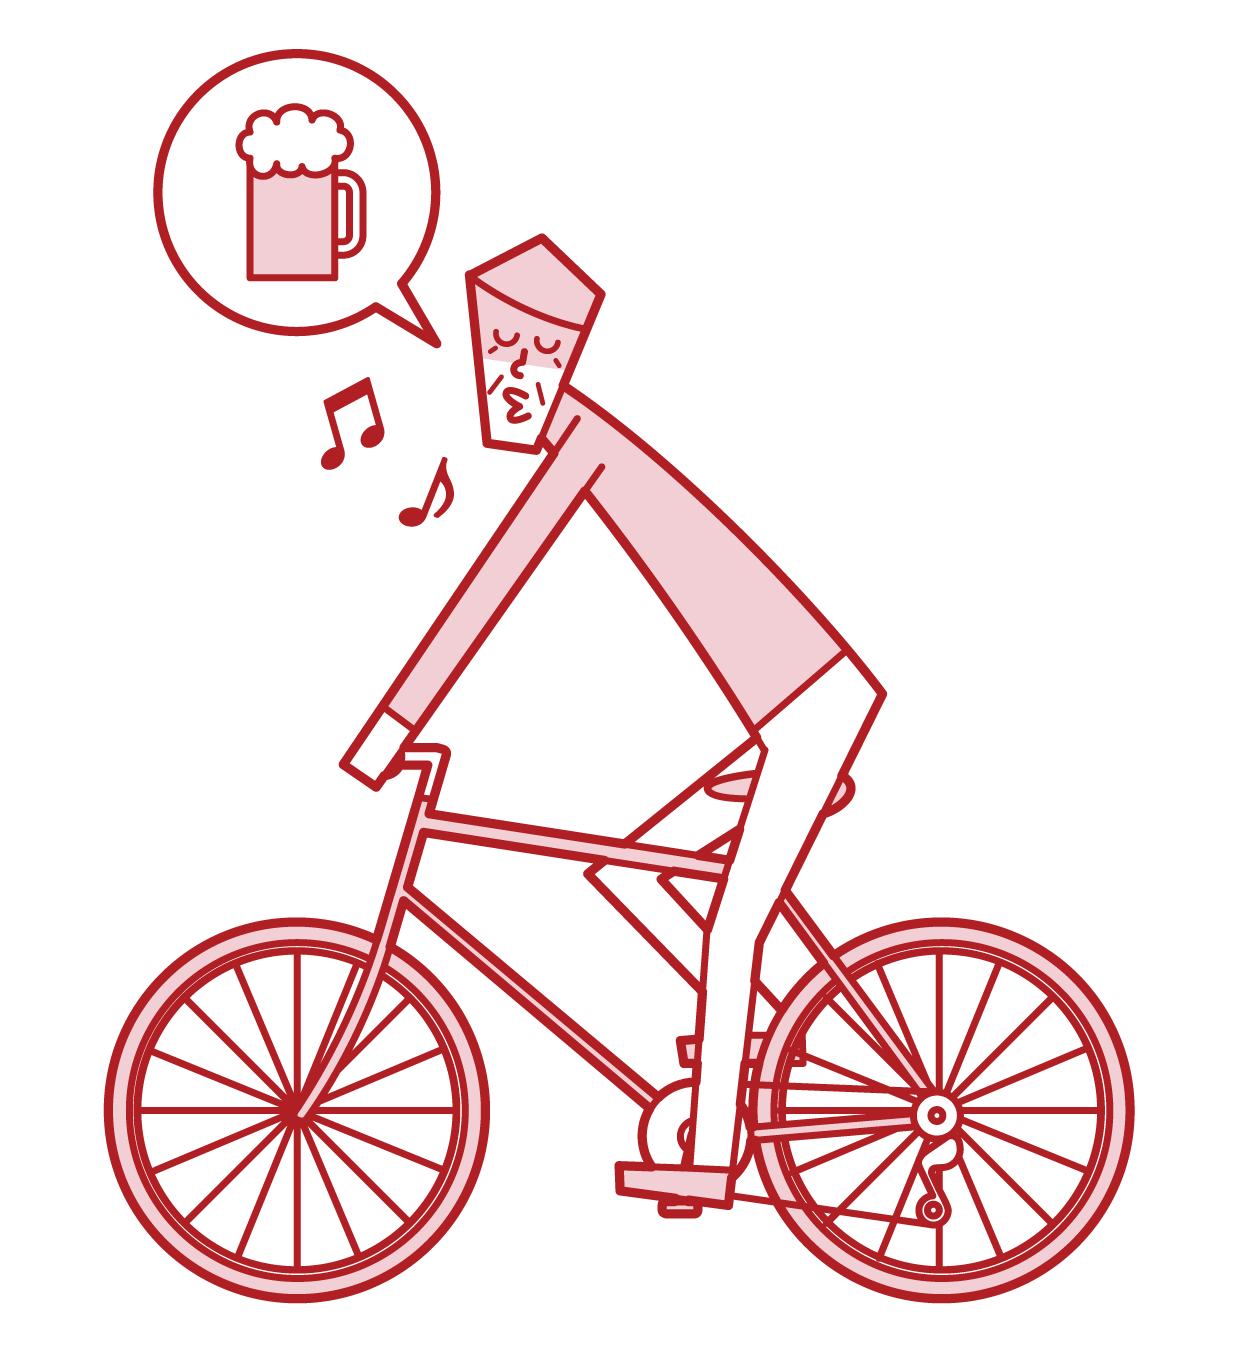 Illustration of a drunk driver (old man) driving drunk on a bicycle